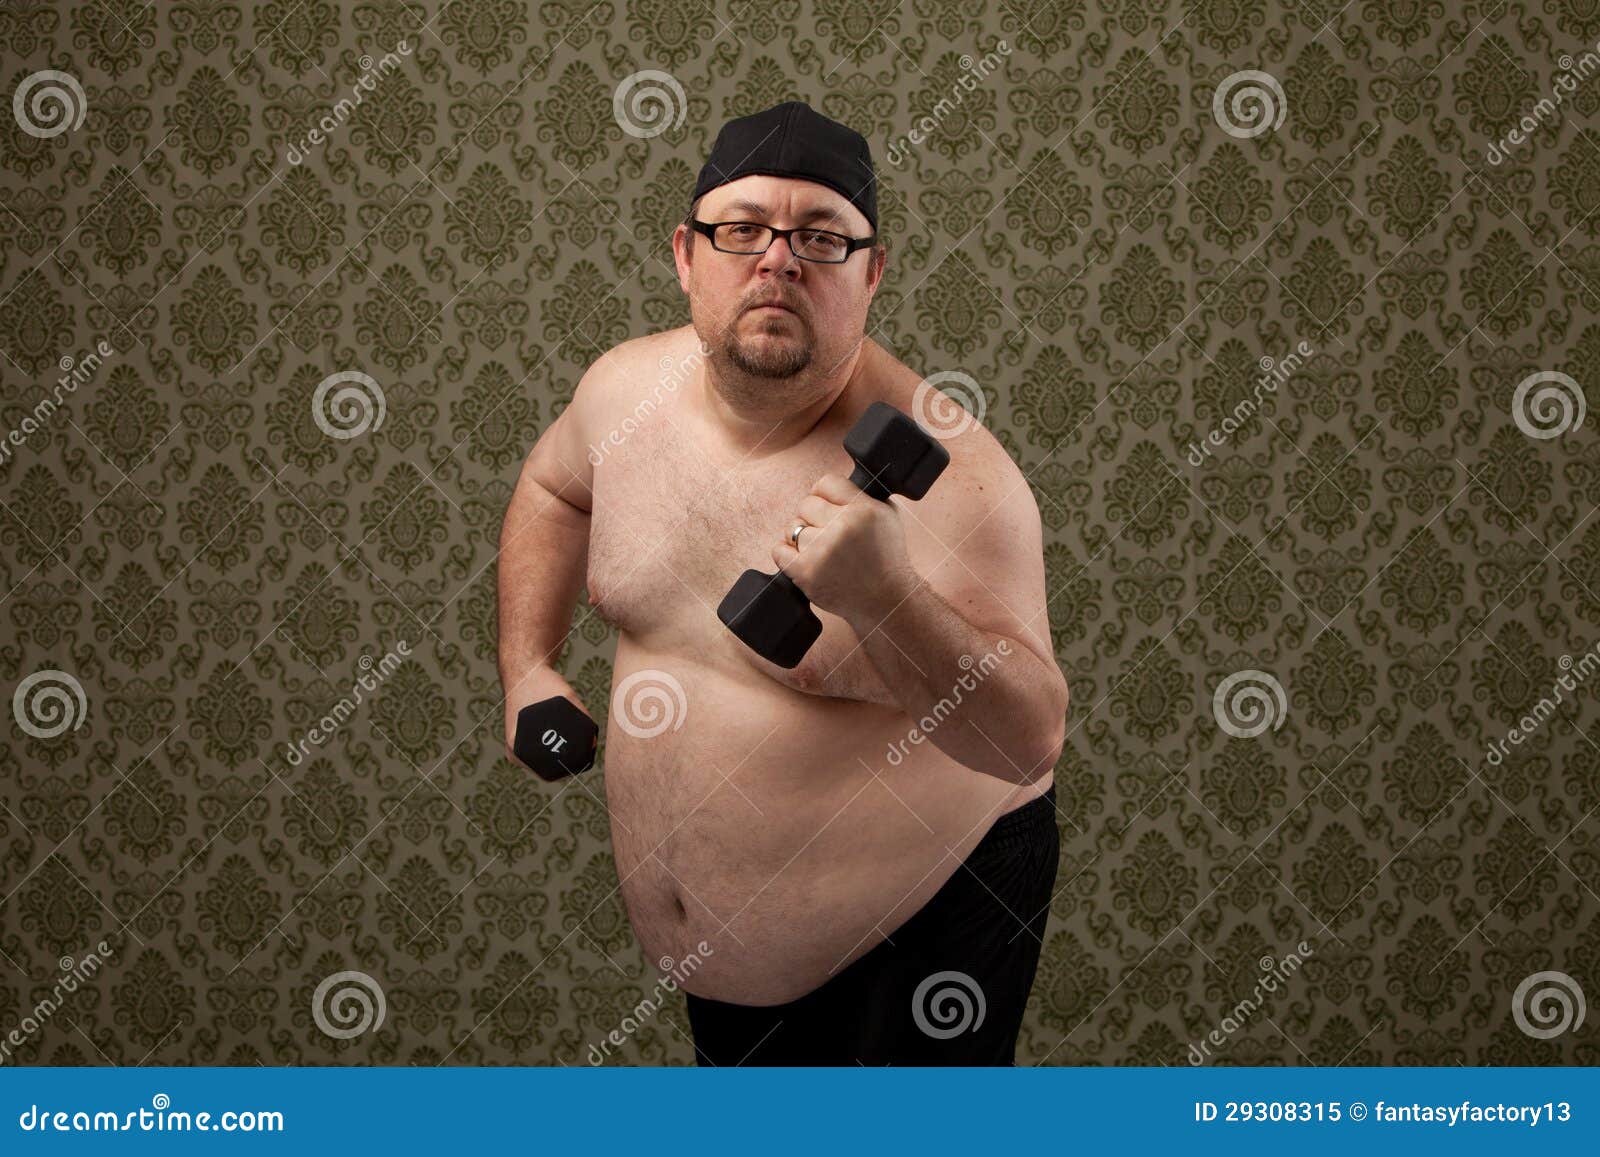 overweight-white-male-working-out-to-get-shape-29308315.jpg